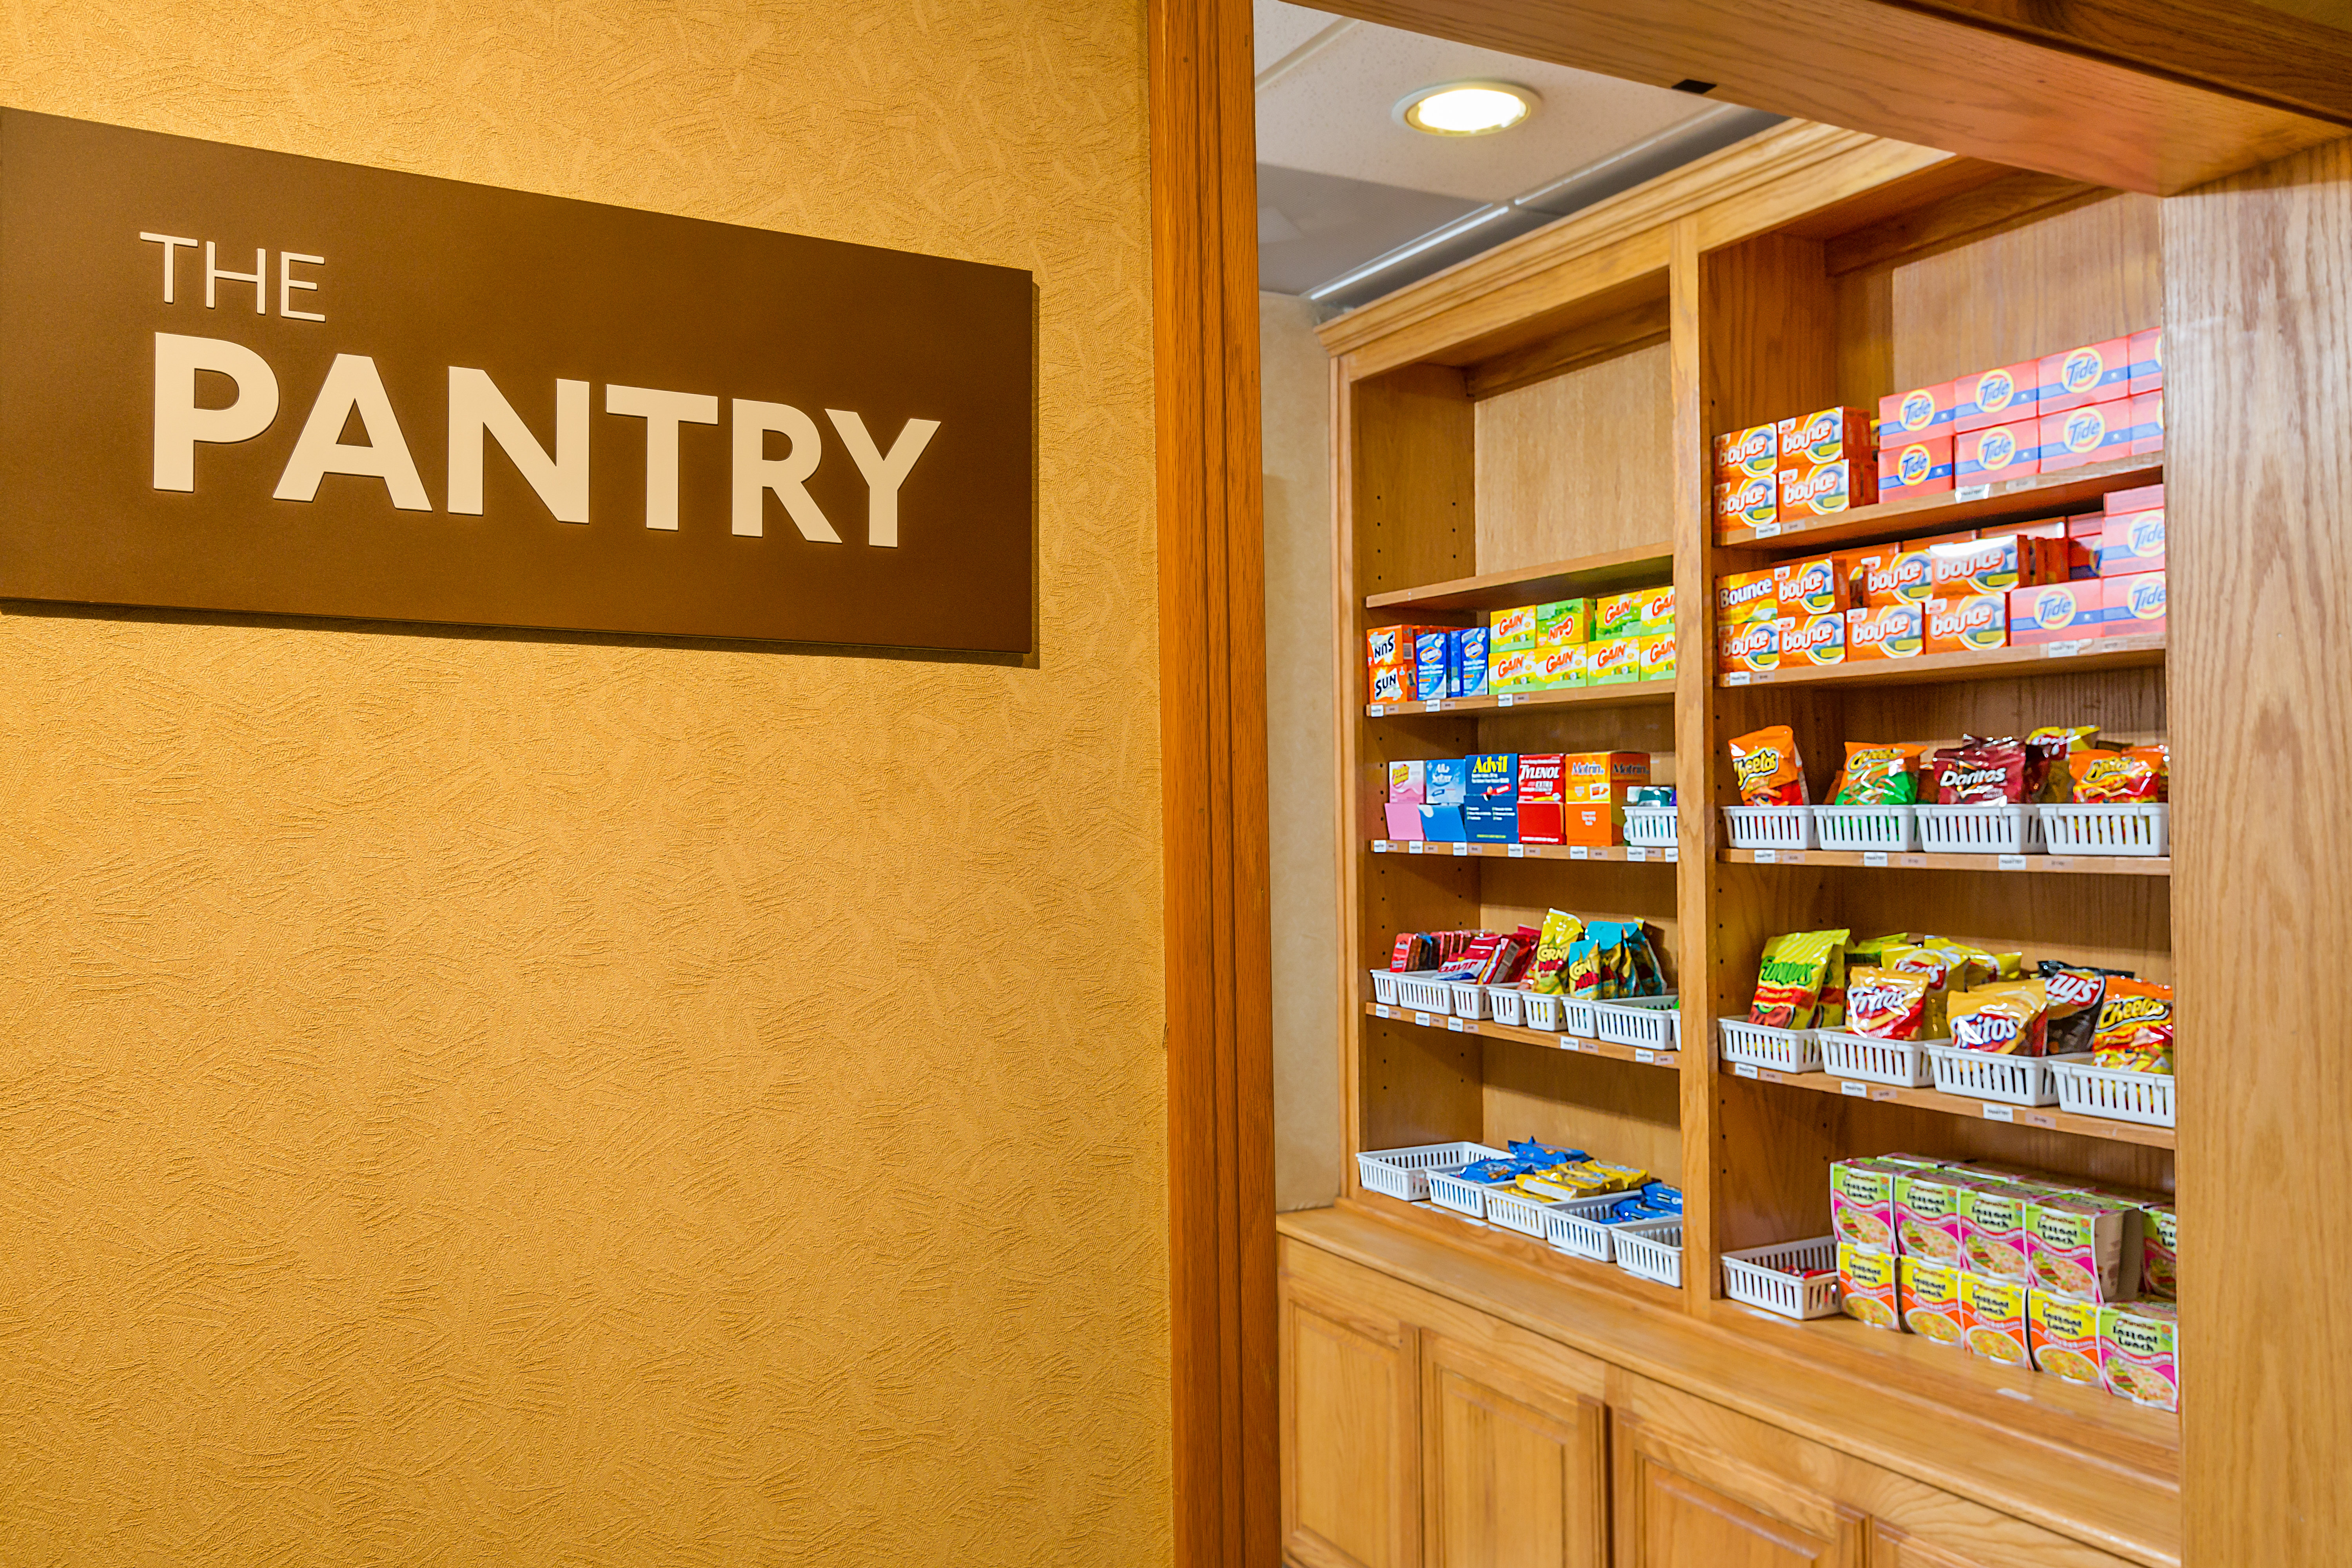 Snacks & beverages available for purchase 24/7 at the Pantry